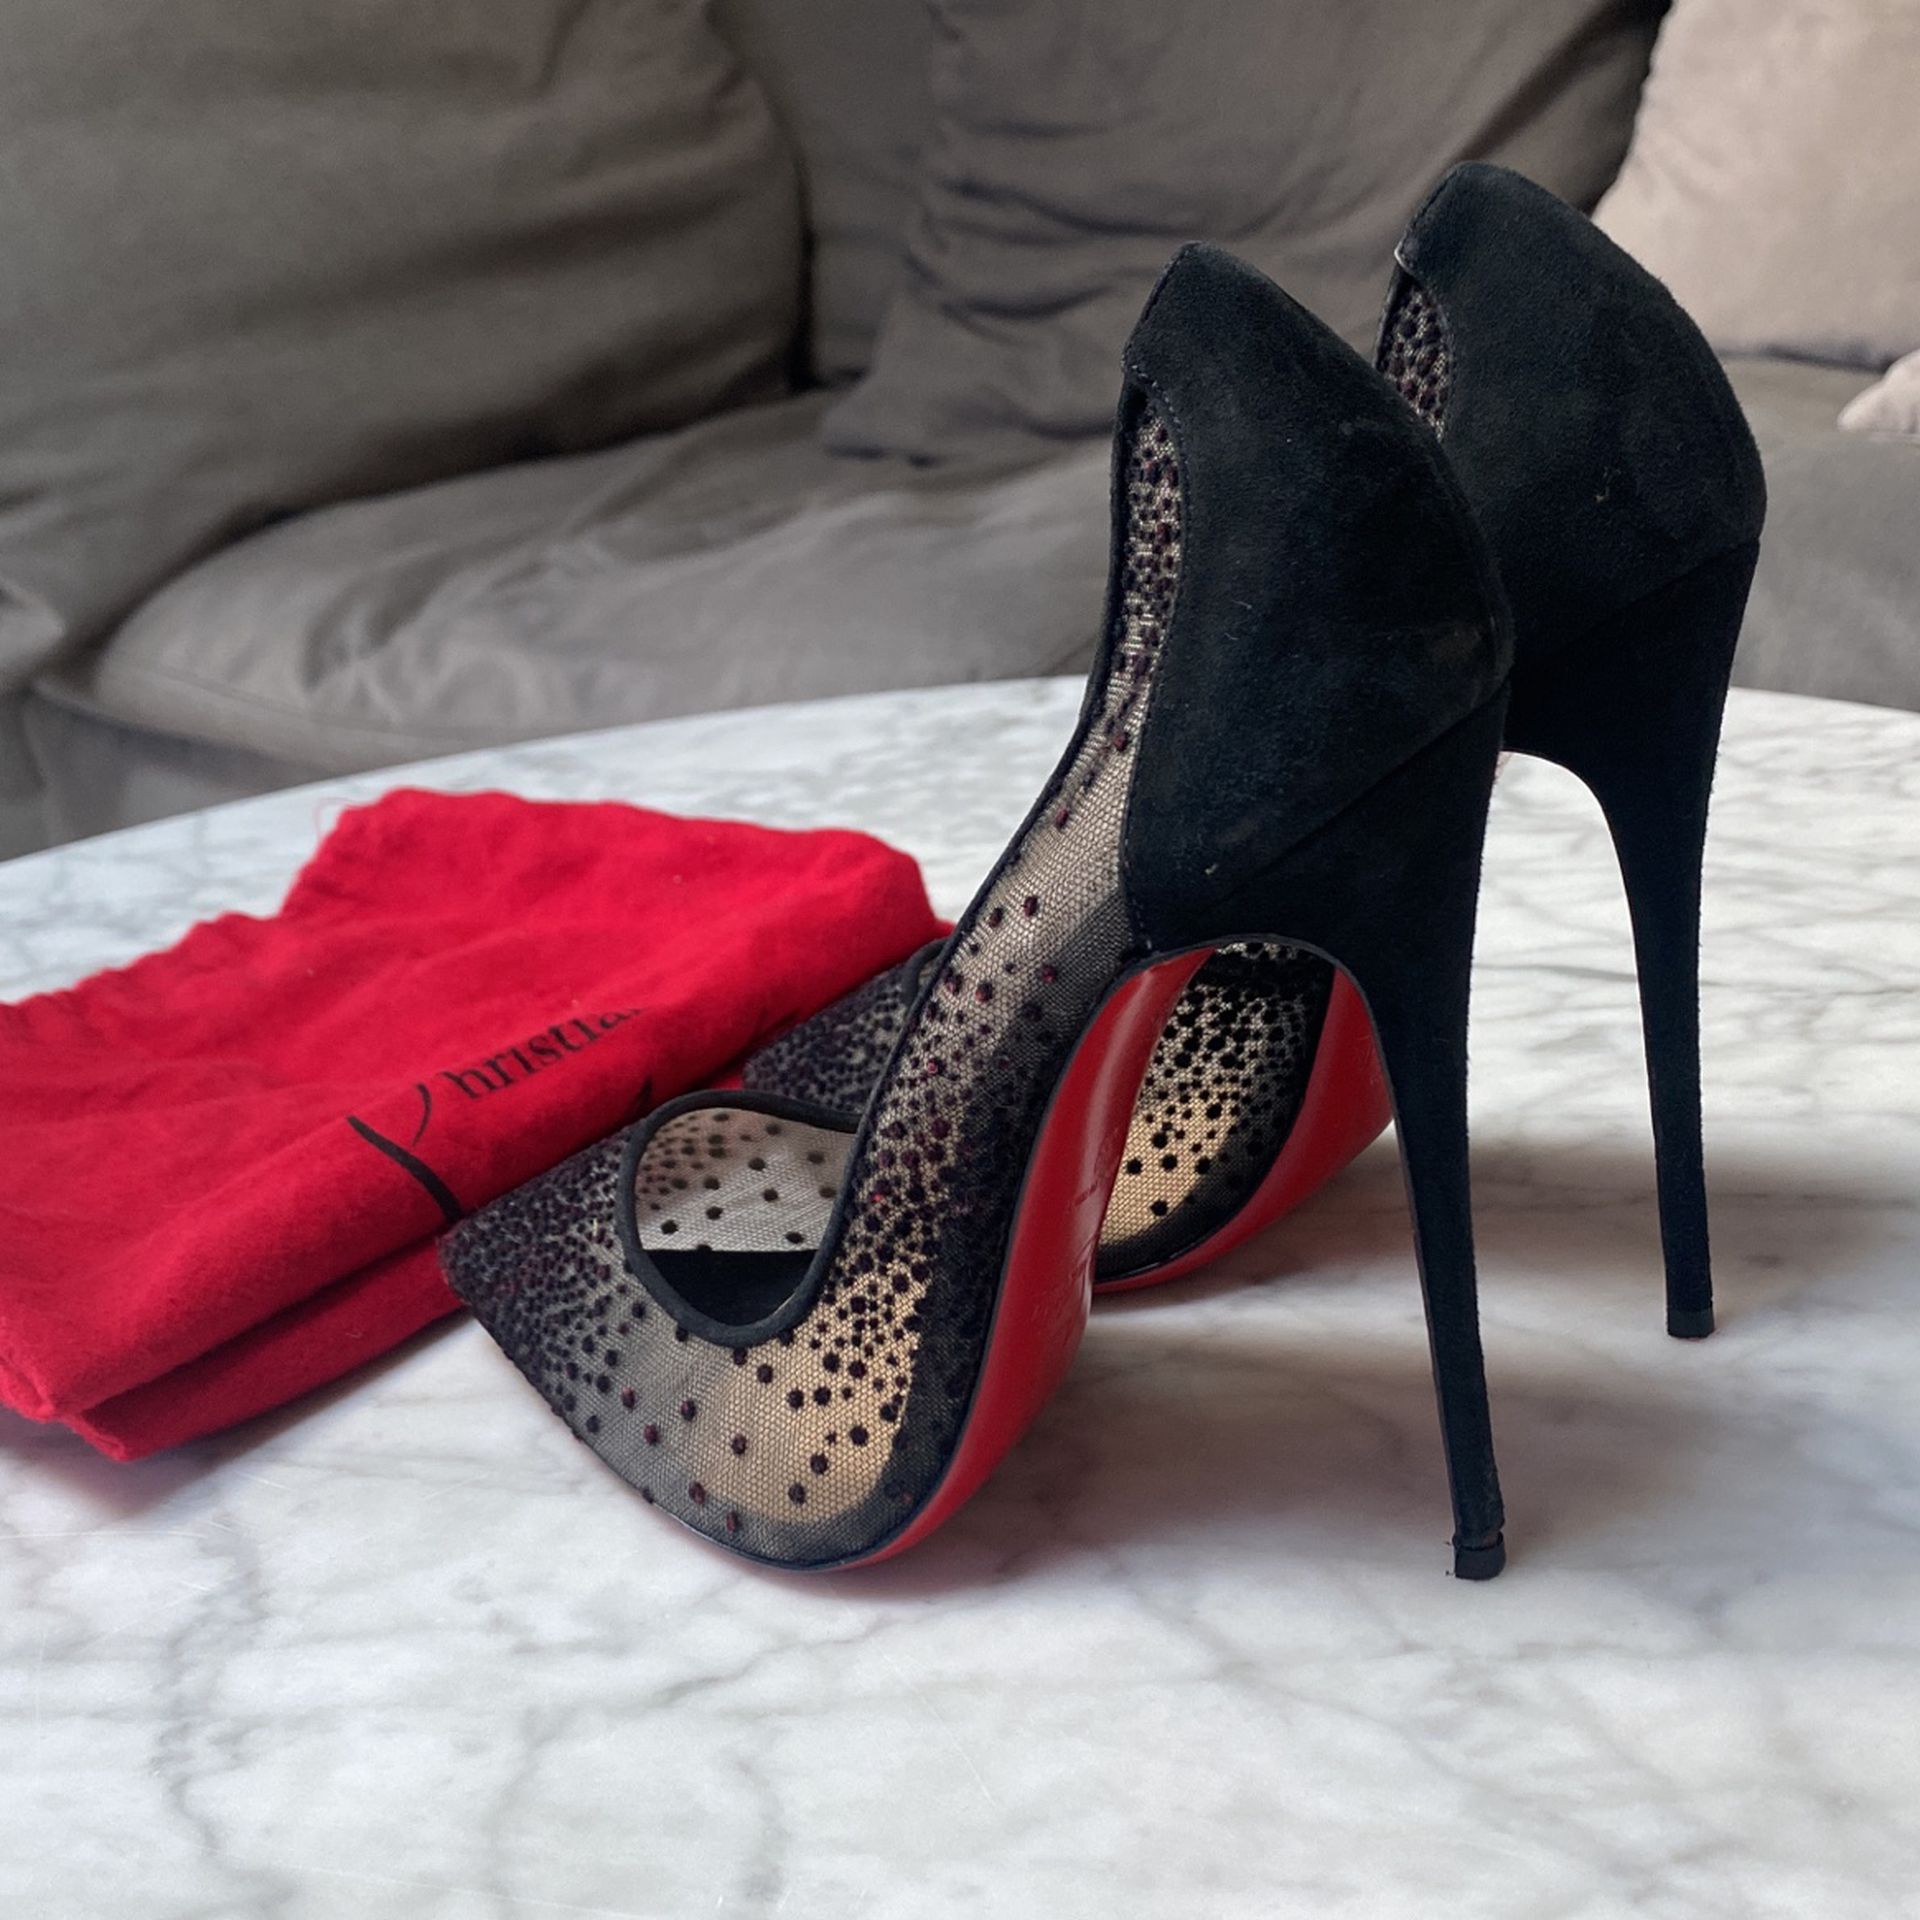 Christian Louboutin So Kate Heels for Sale in North Bergen, NJ - OfferUp